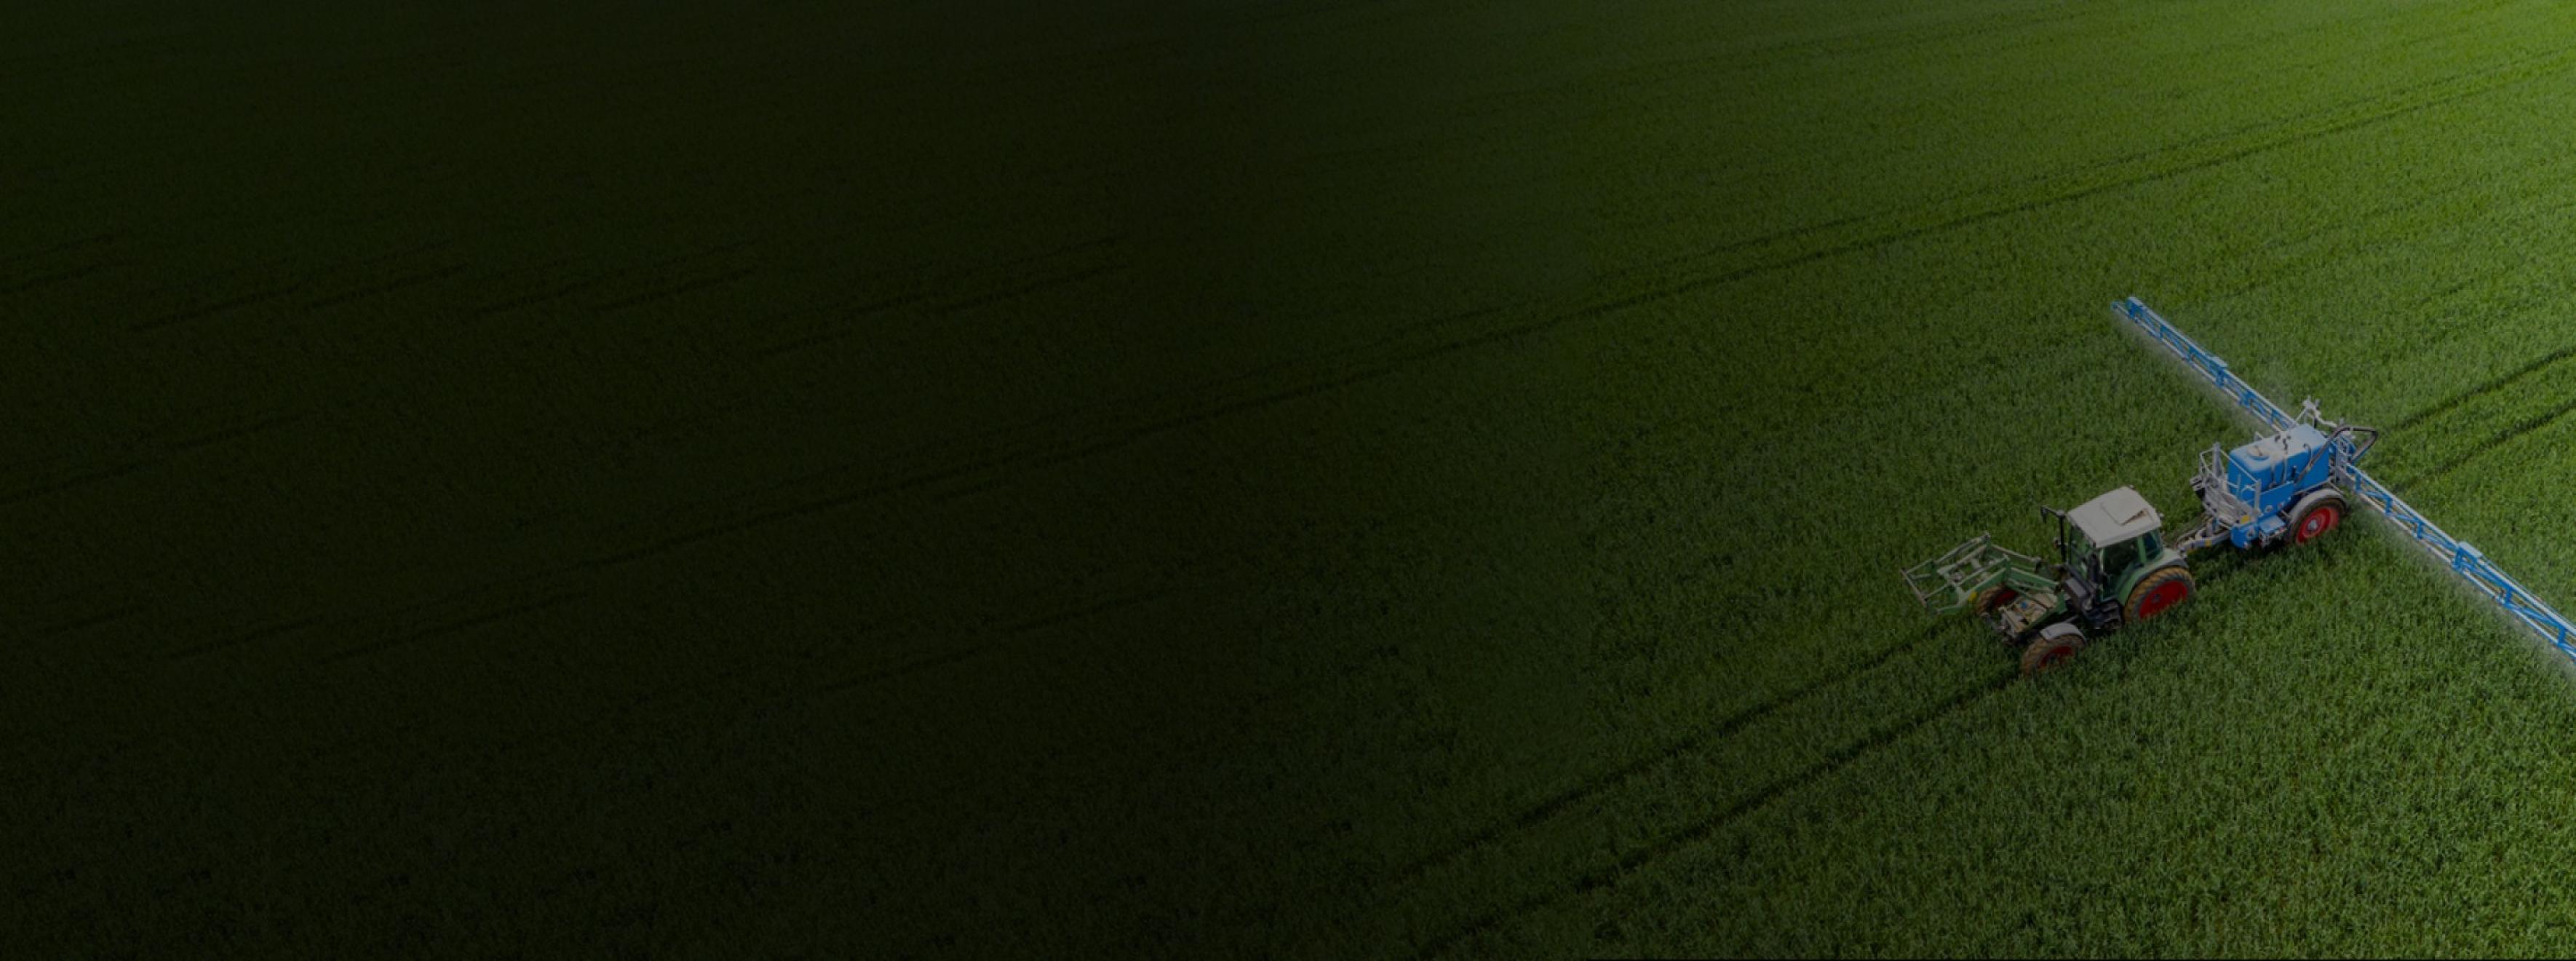 Aerial shot of a tractor in a field